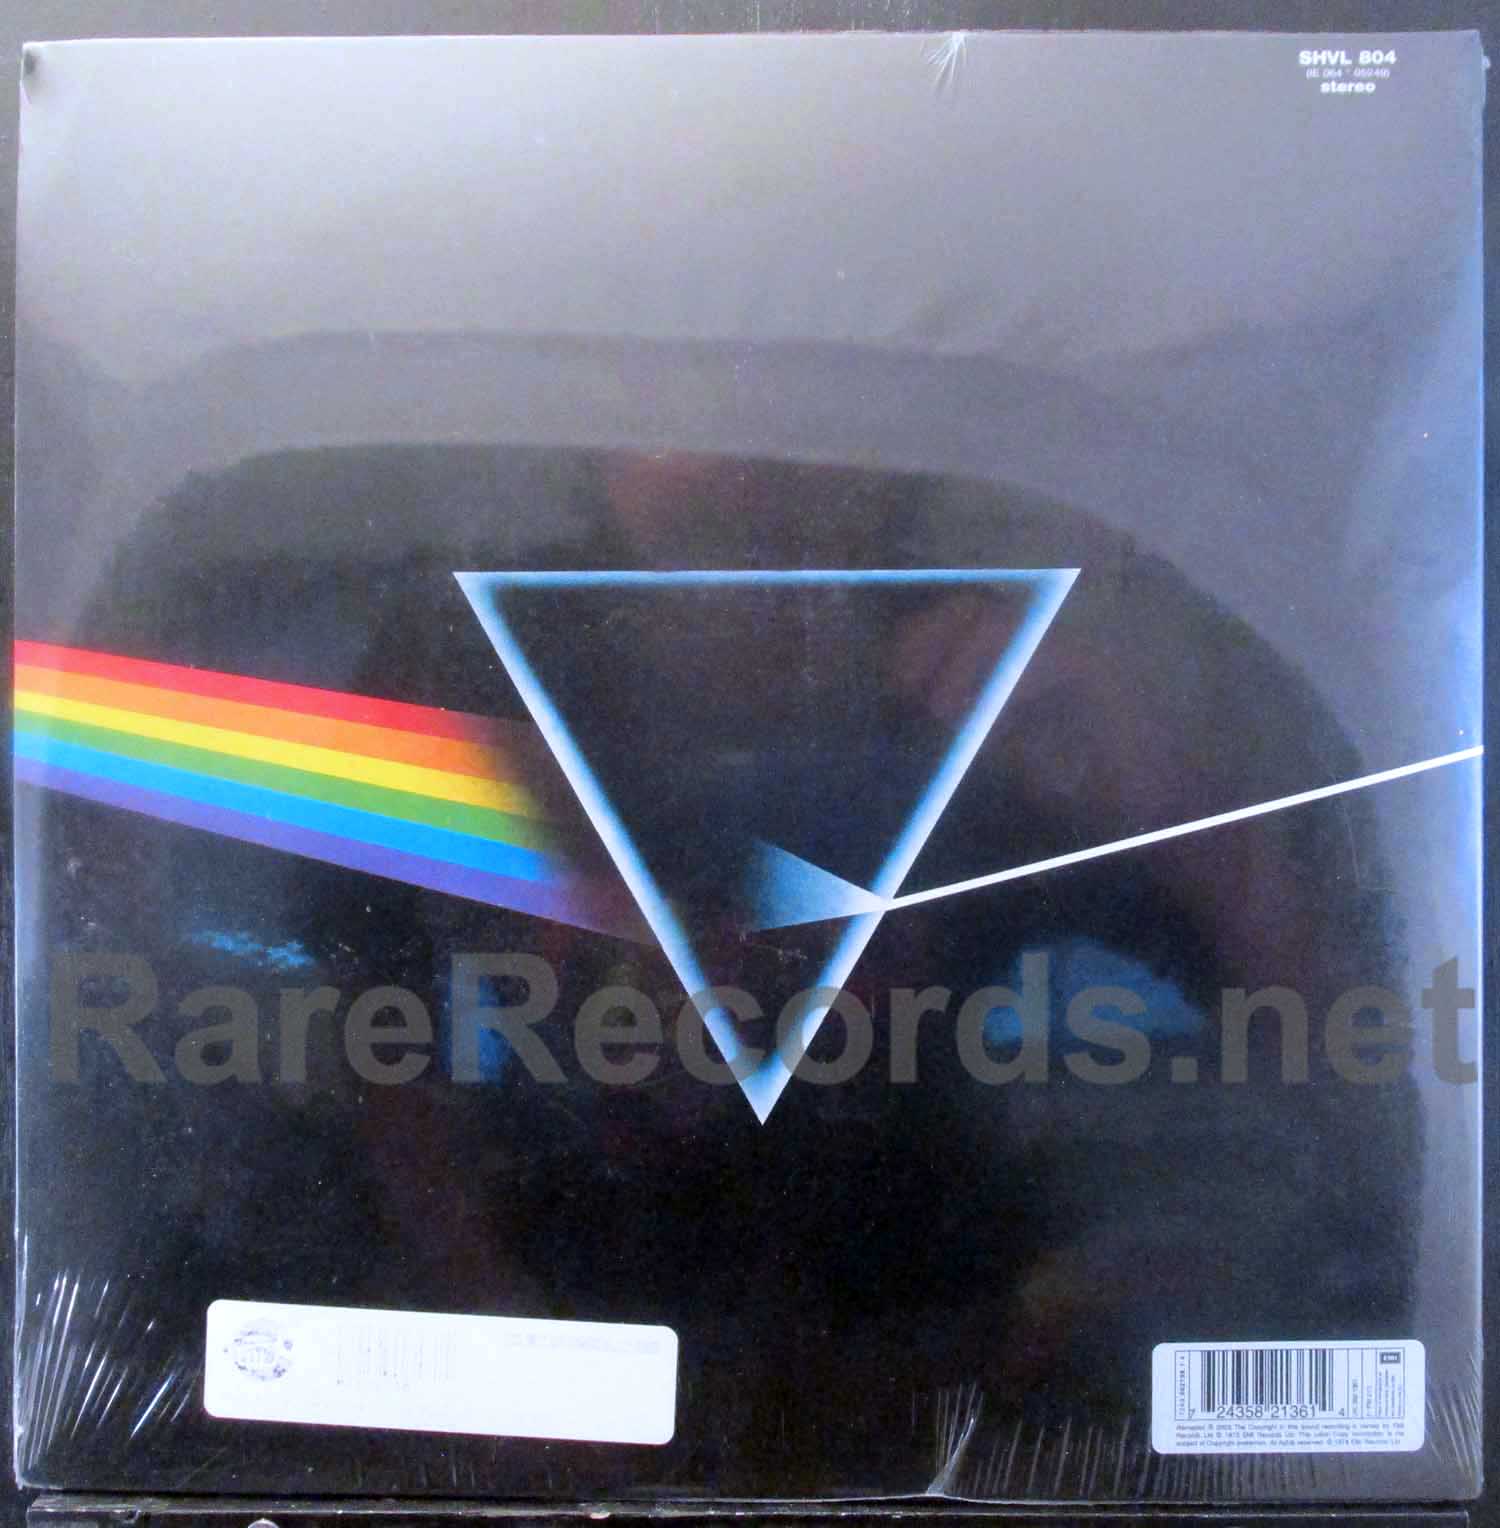 Pink Floyd - The Dark Side of the Moon sealed 30th anniversary EU LP